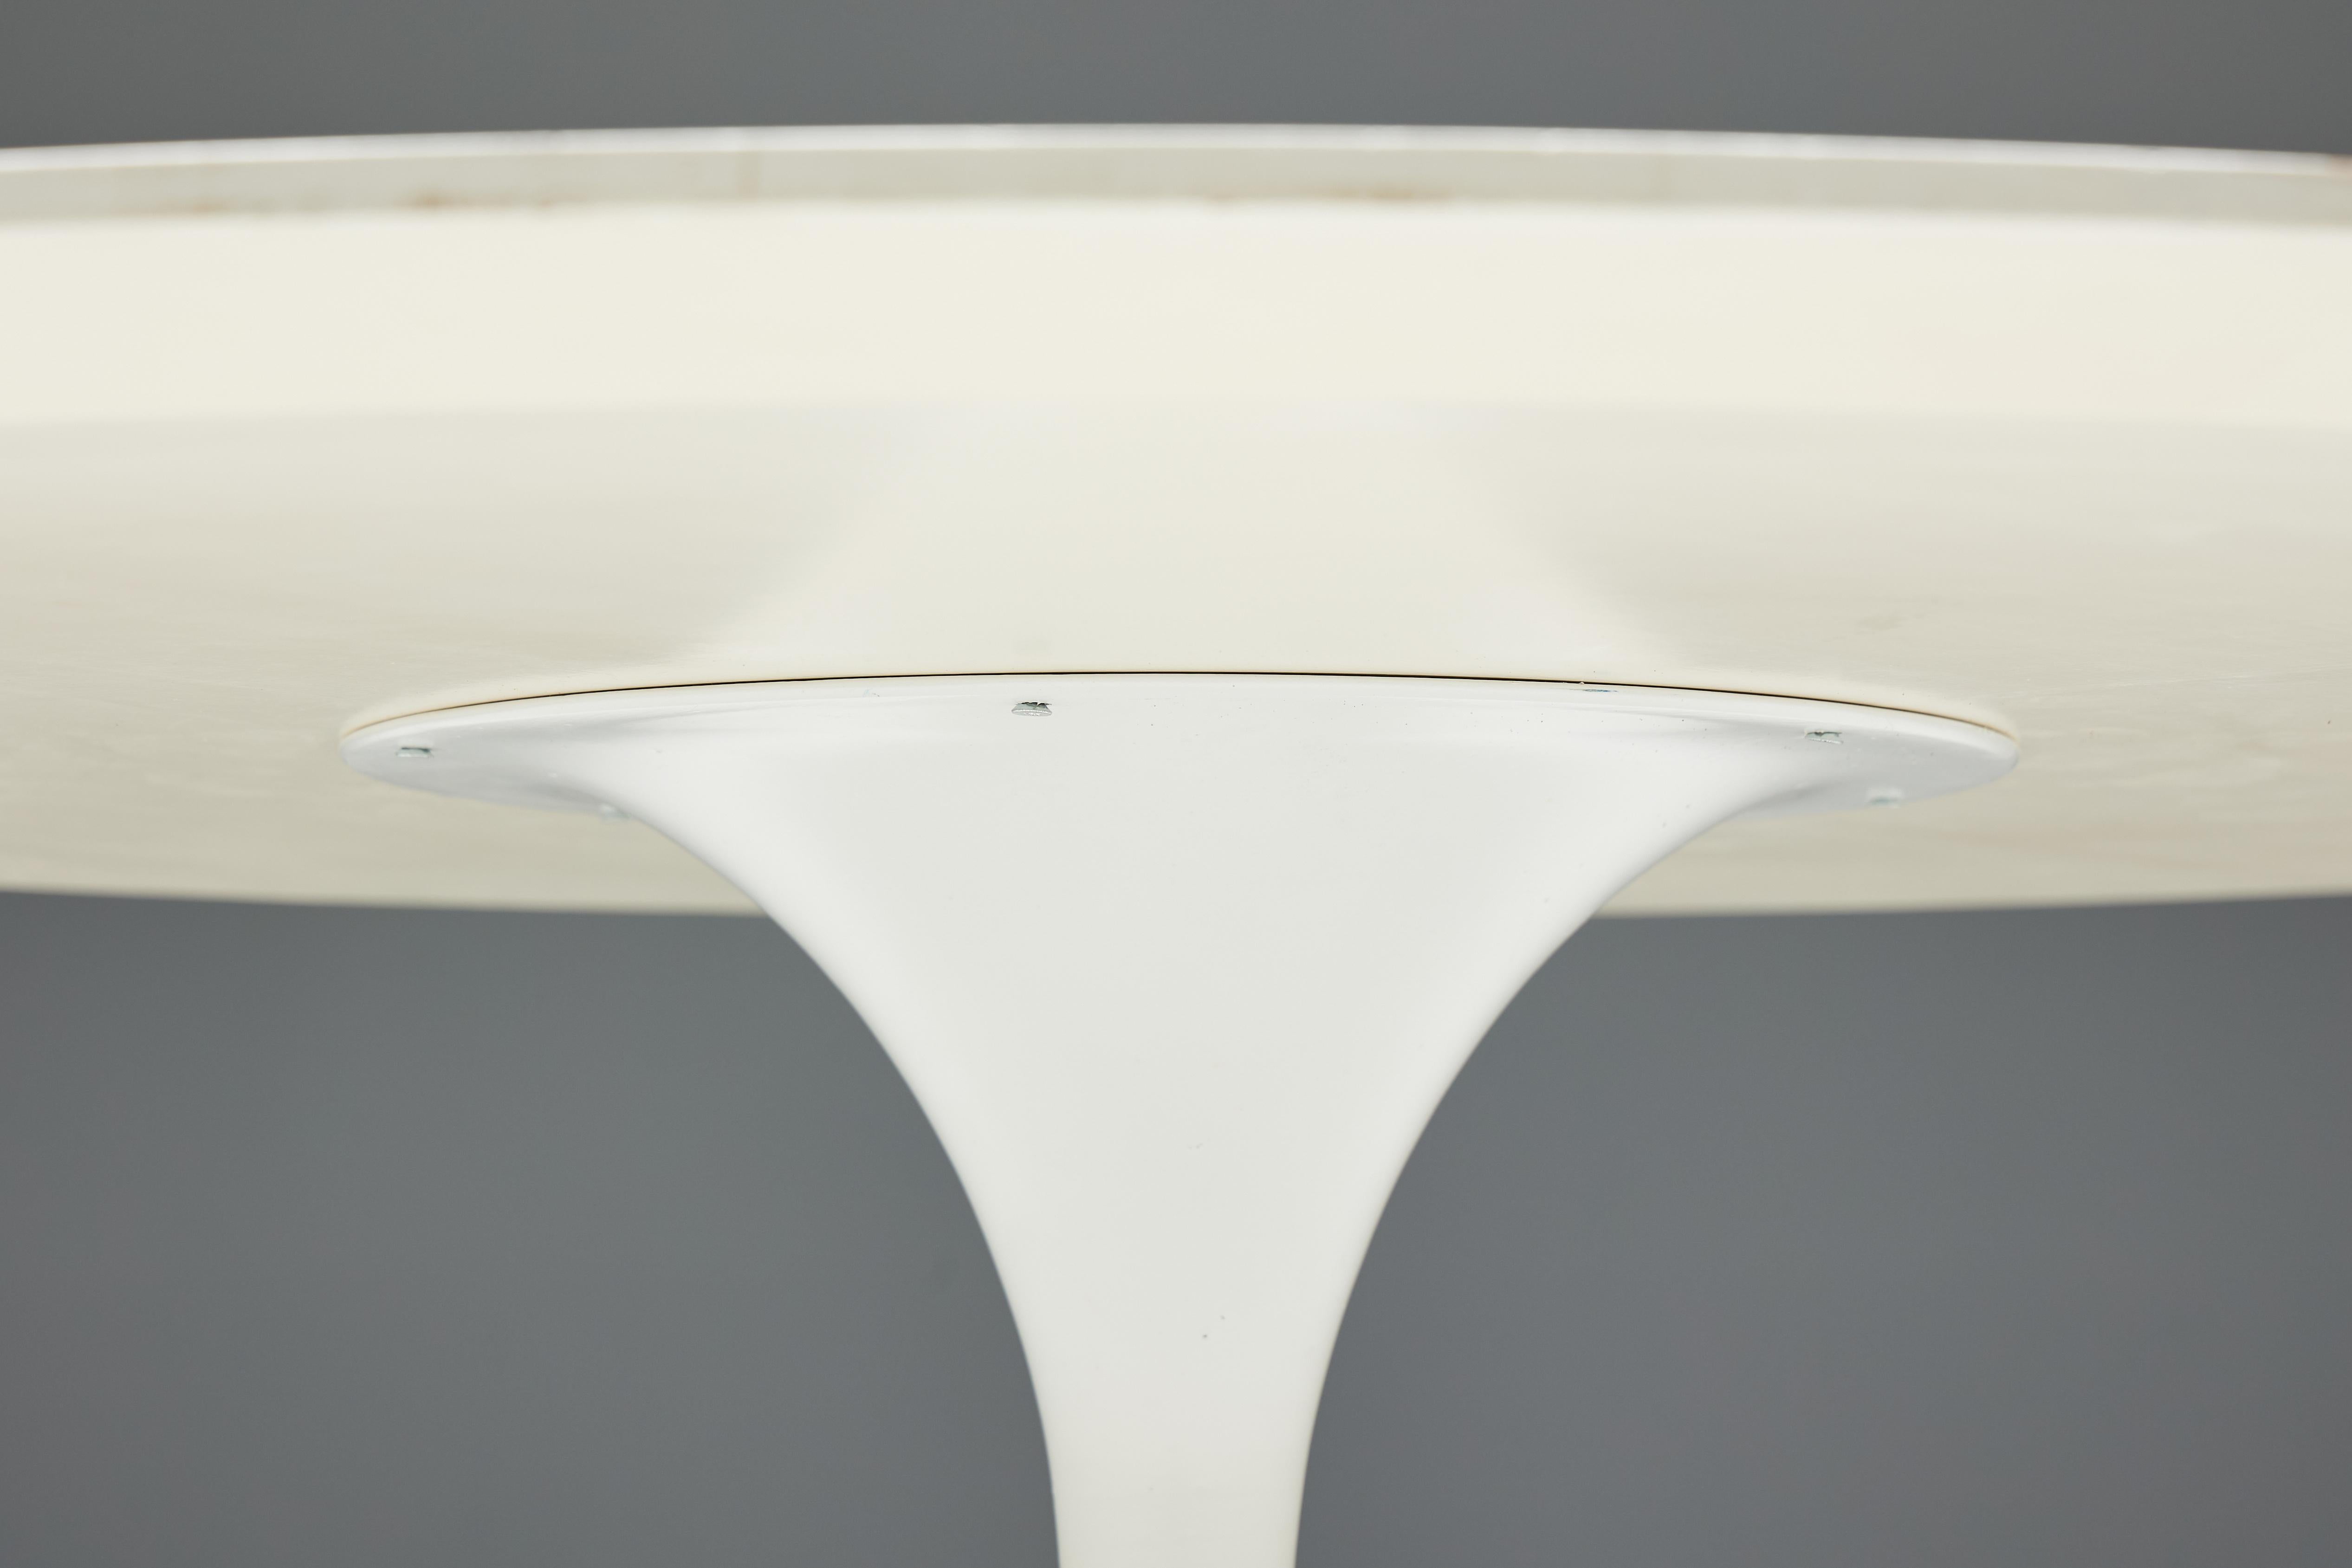 Aluminum Tulip Dining Table by Eero Saarinen for Knoll, United States, 1960s For Sale